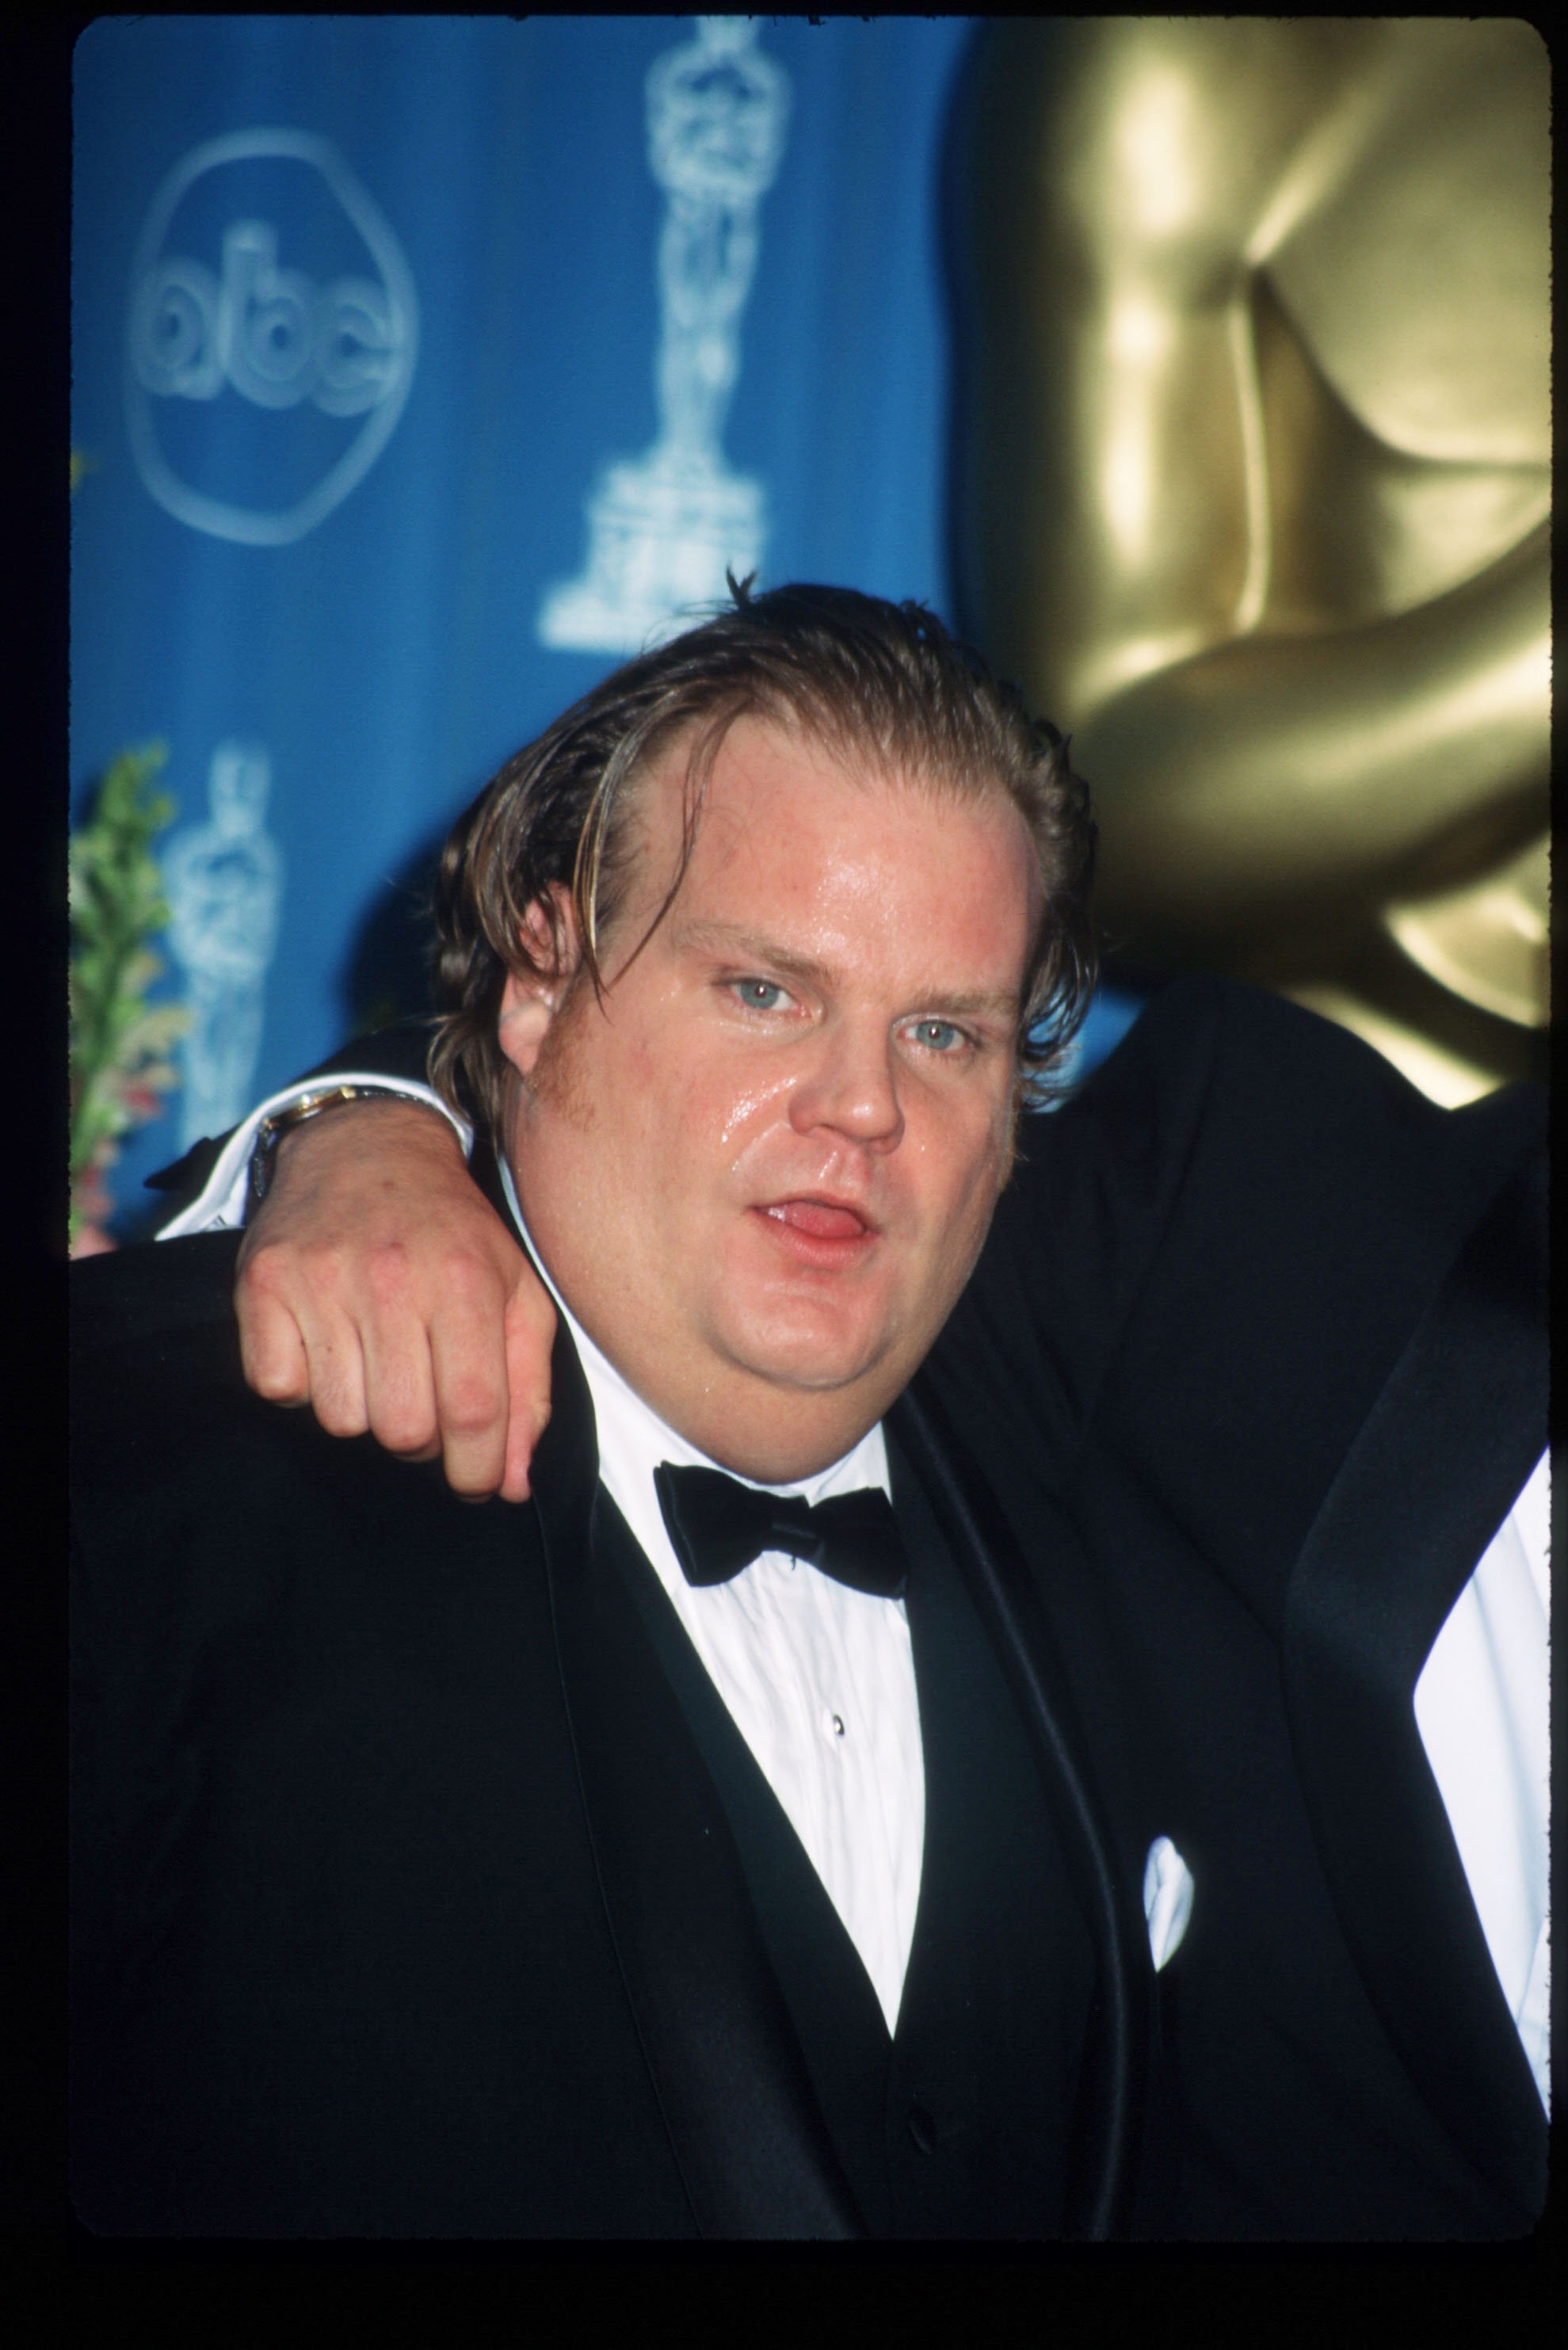 Chris Farley attends the 69th Annual Academy Awards ceremony on March 24, 1997, in Los Angeles, CA. I Source: Getty Images